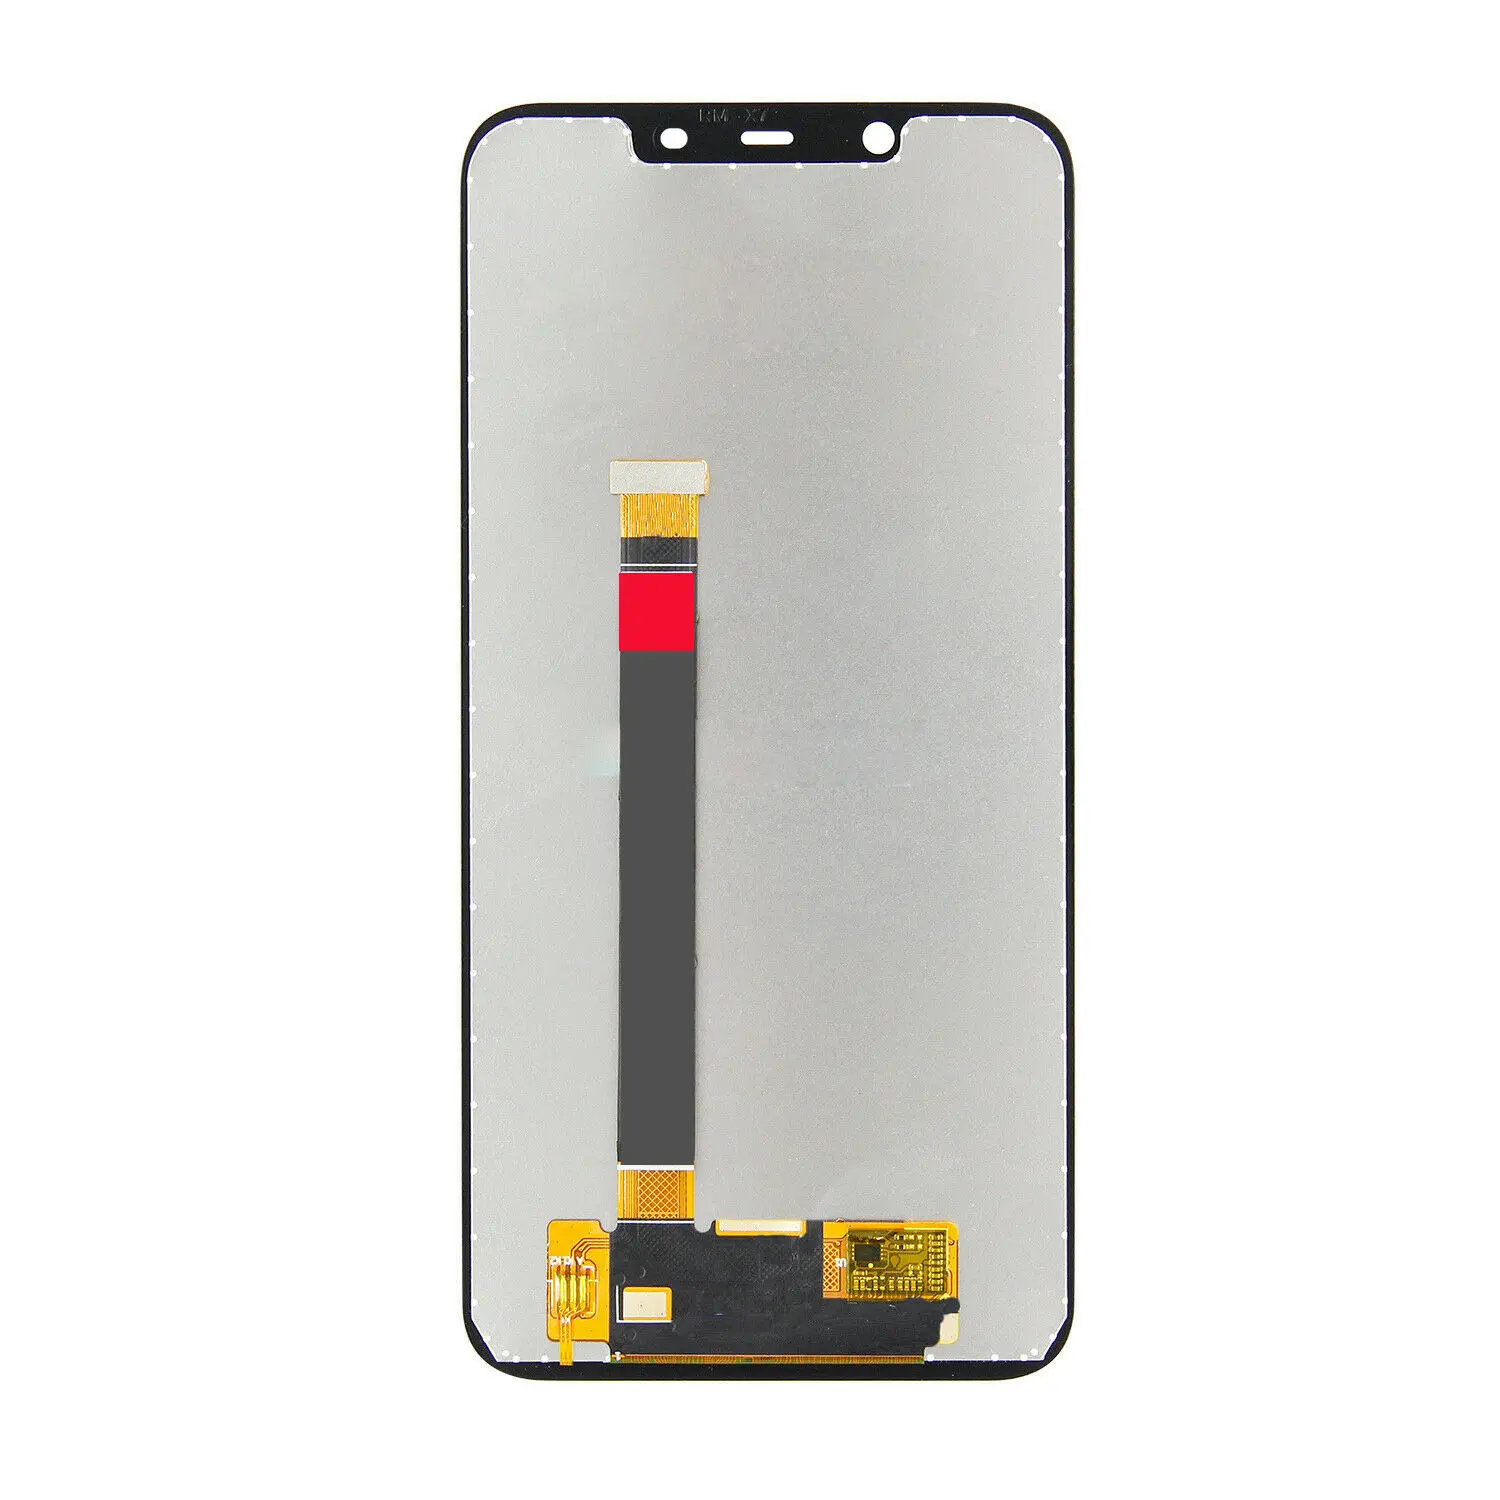 6.1inch Oem mobile phone lcd Replacement Screen digitizer For Nokia X7 TA-1131 lcd display for nokia x7 g10 5.3inch lcd